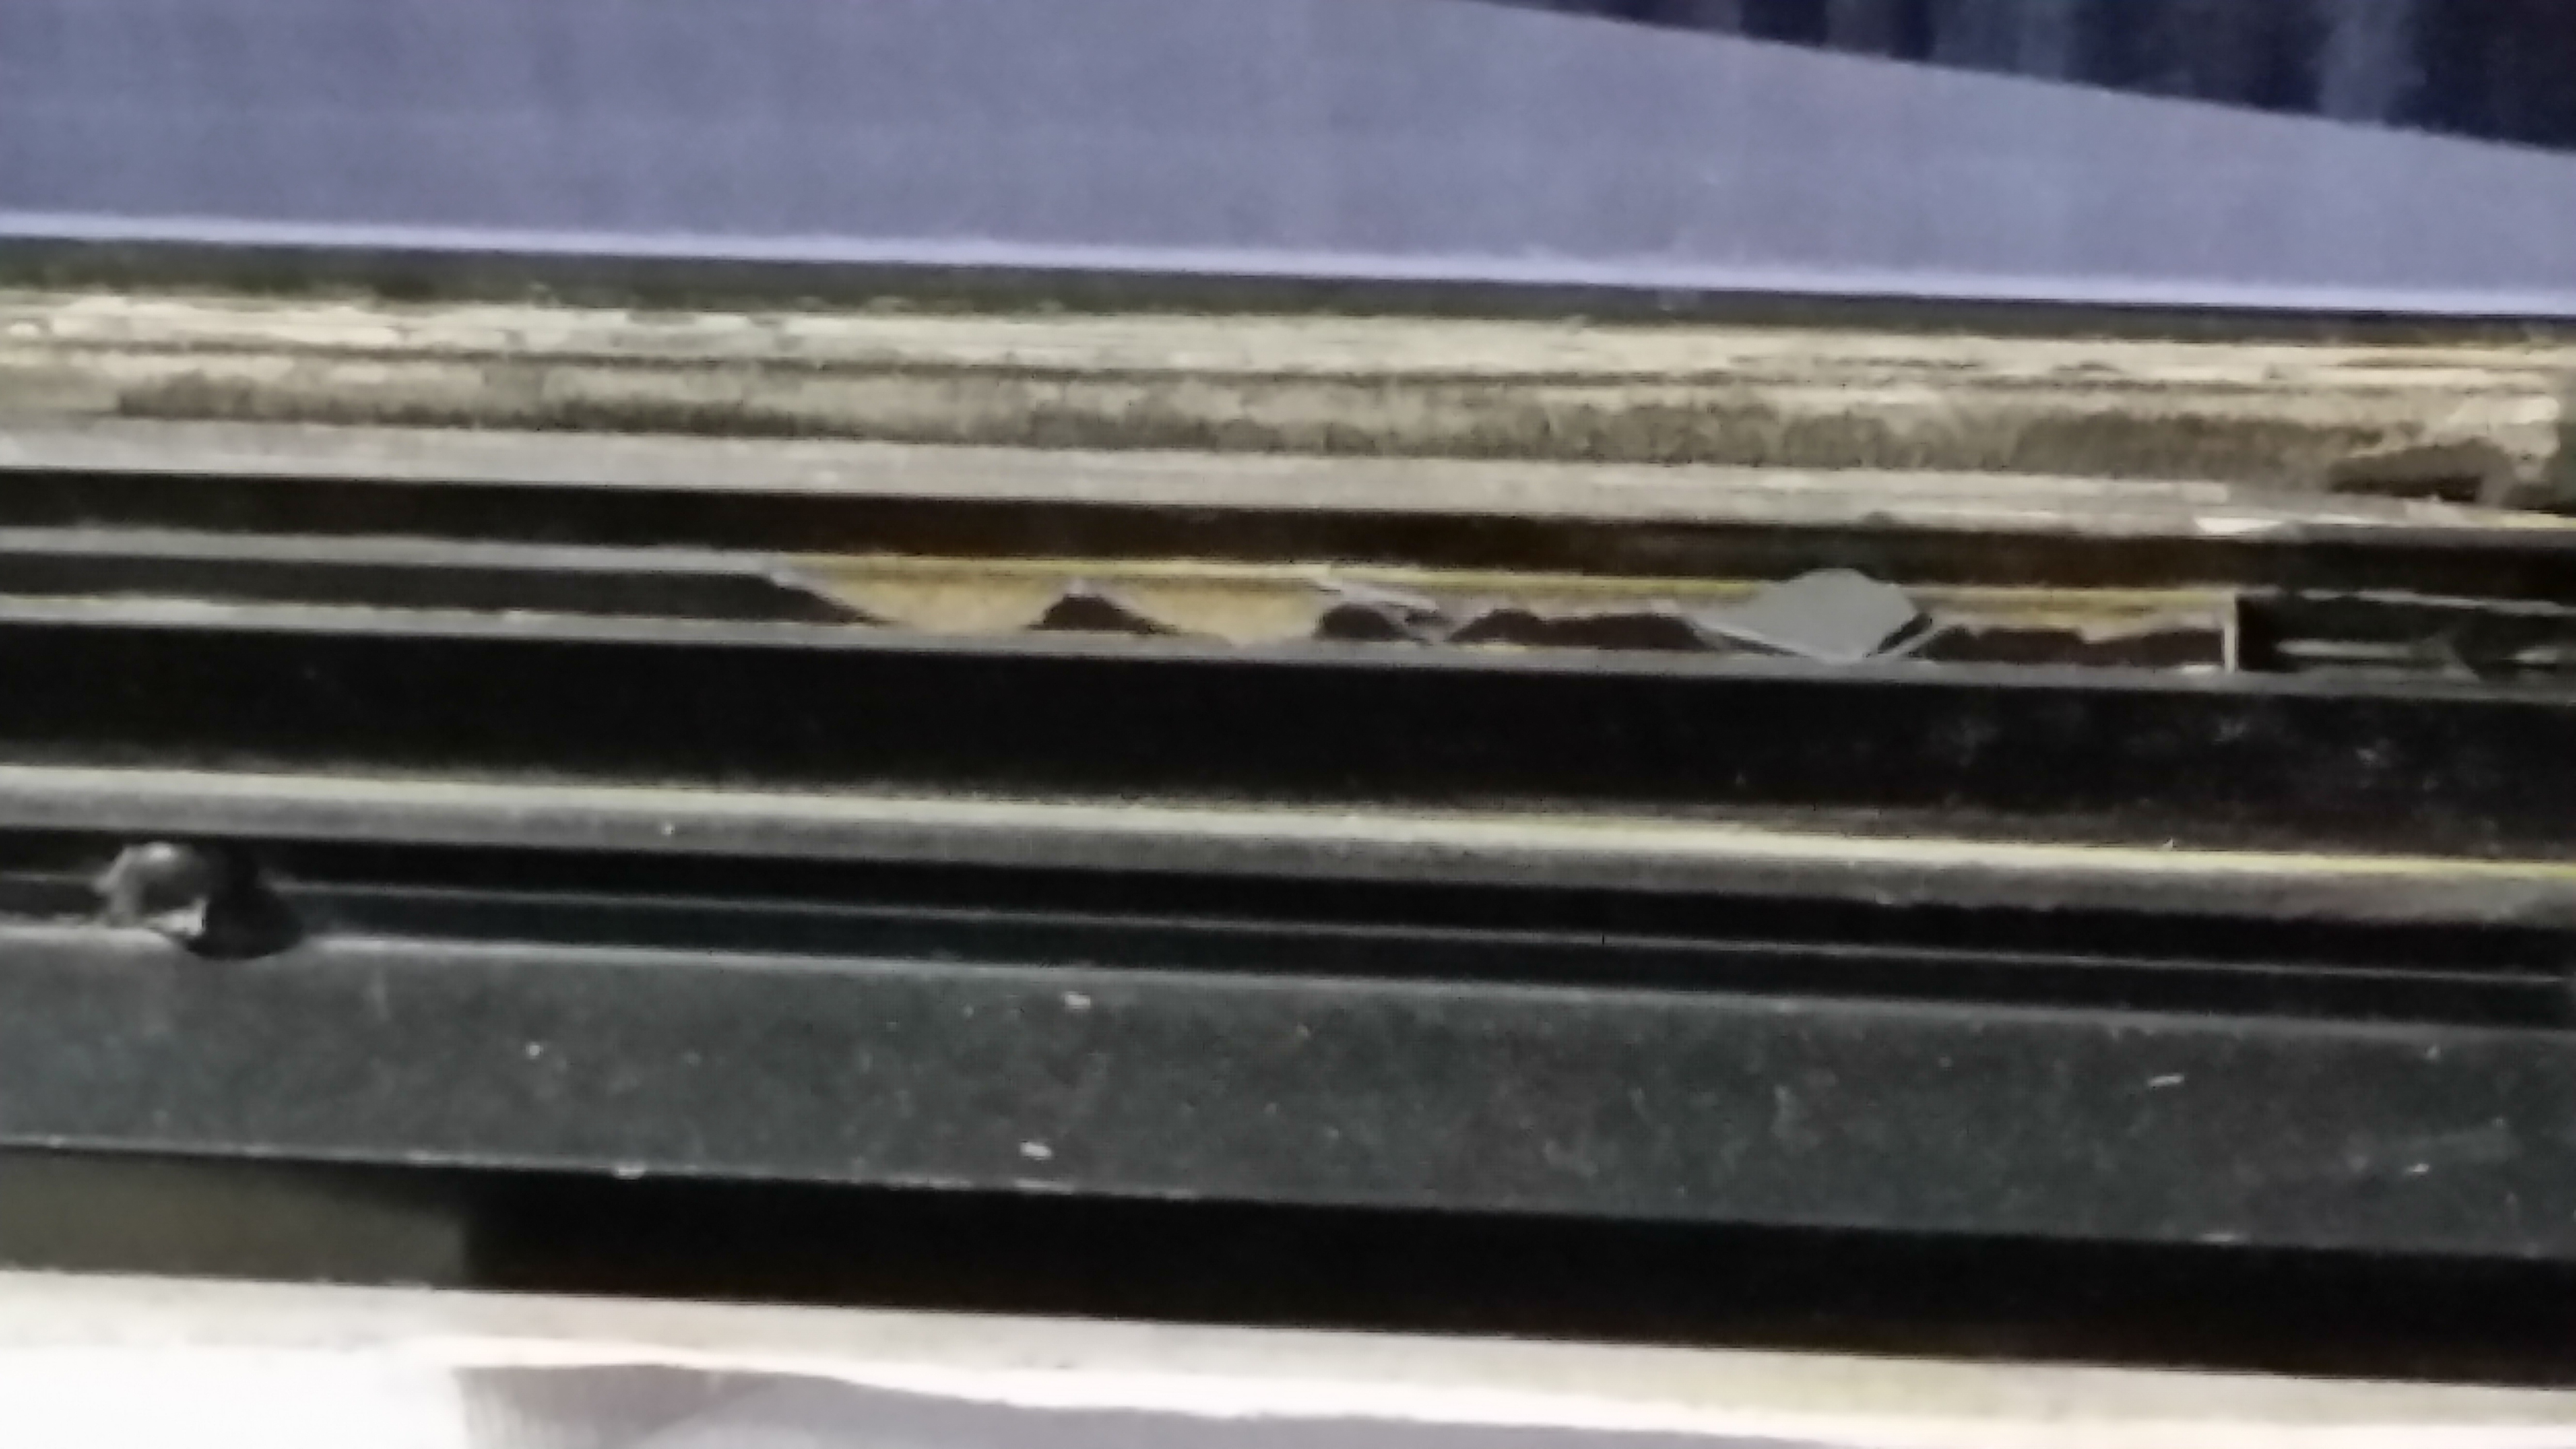 Windows frame not good, many chipped plastic.